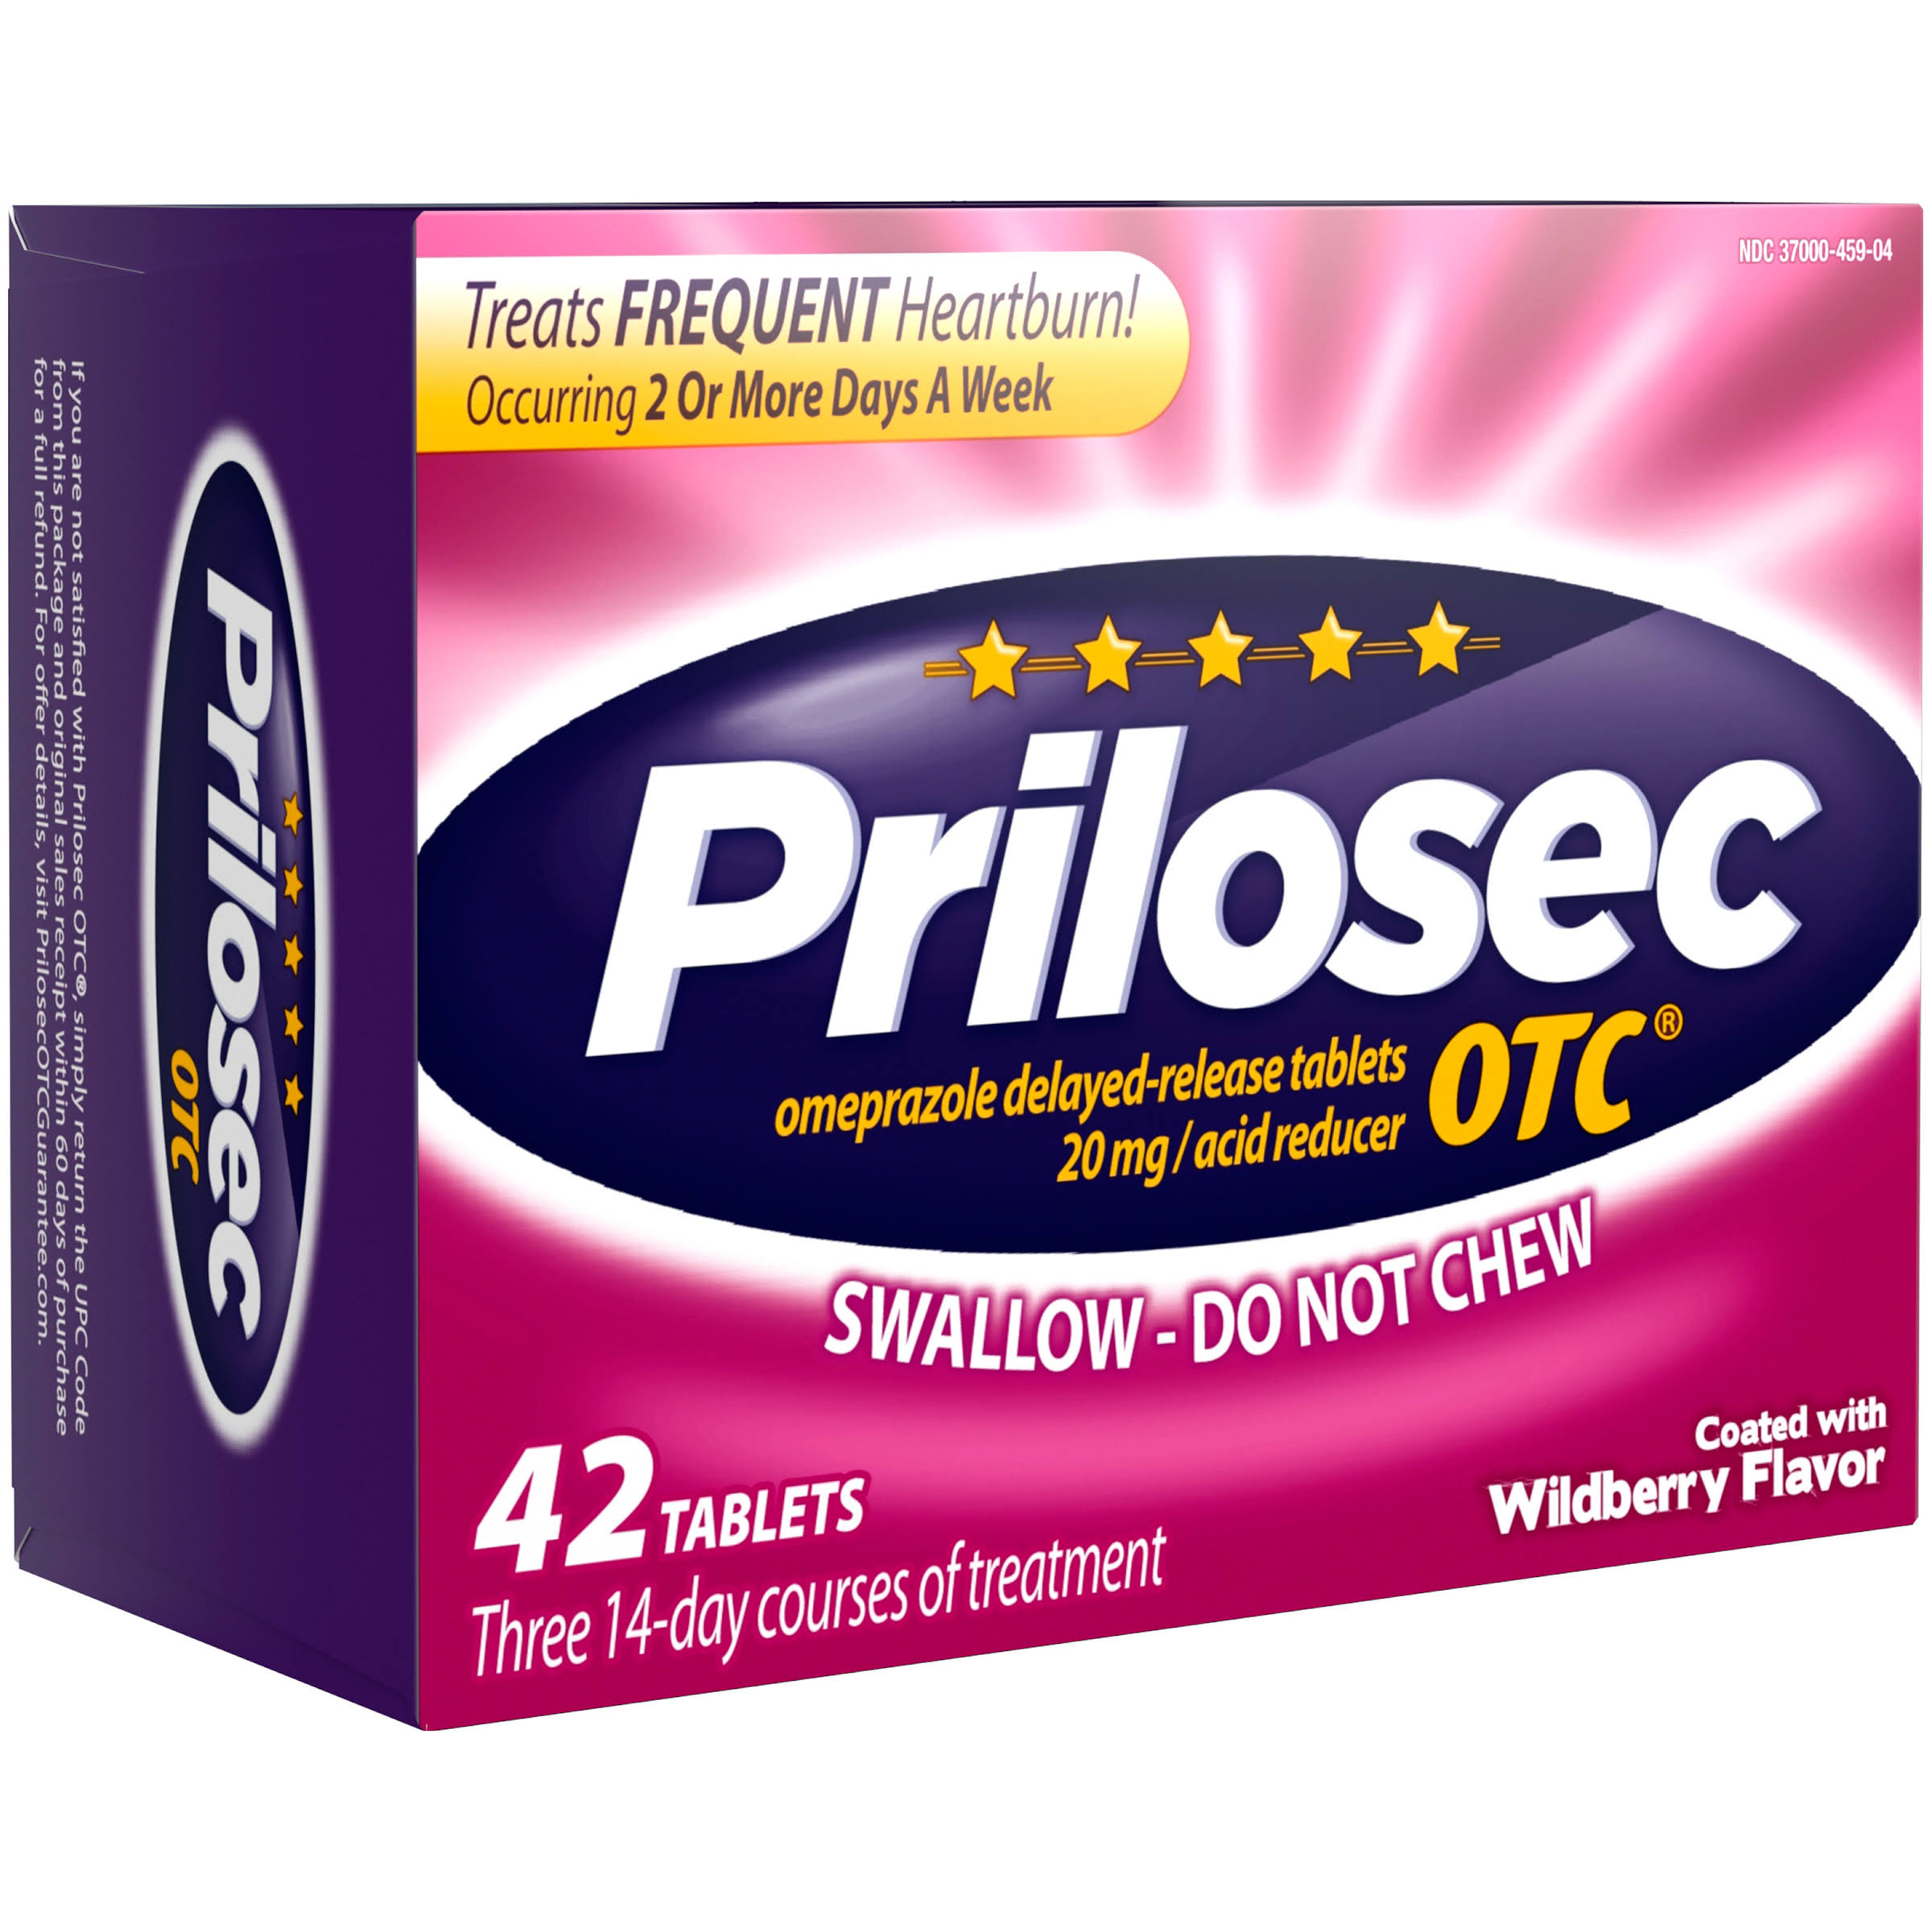 Prilosec OTC Frequent Heartburn Medicine and Acid Reducer Treatment with Omeprazole - Wildberry Flavor, 42 Tablets